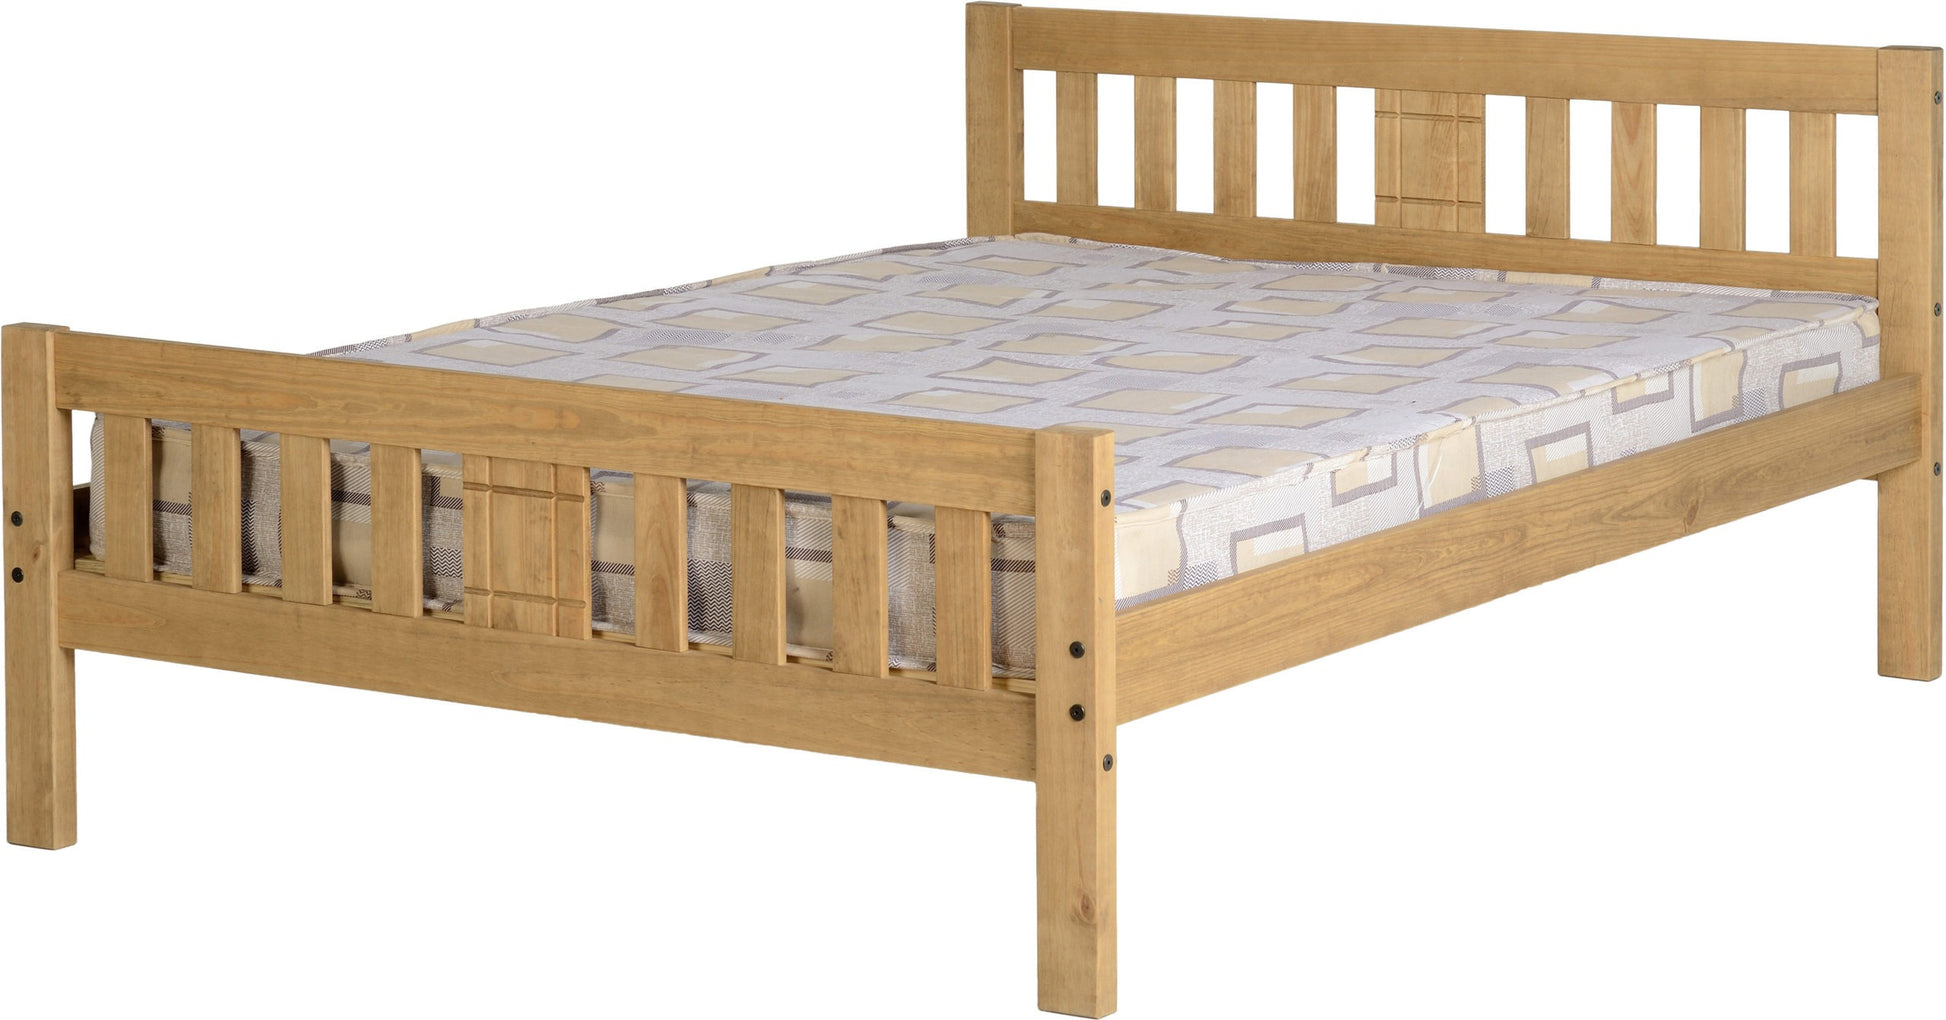 RIO_BED_DETAIL-scaled.jpg